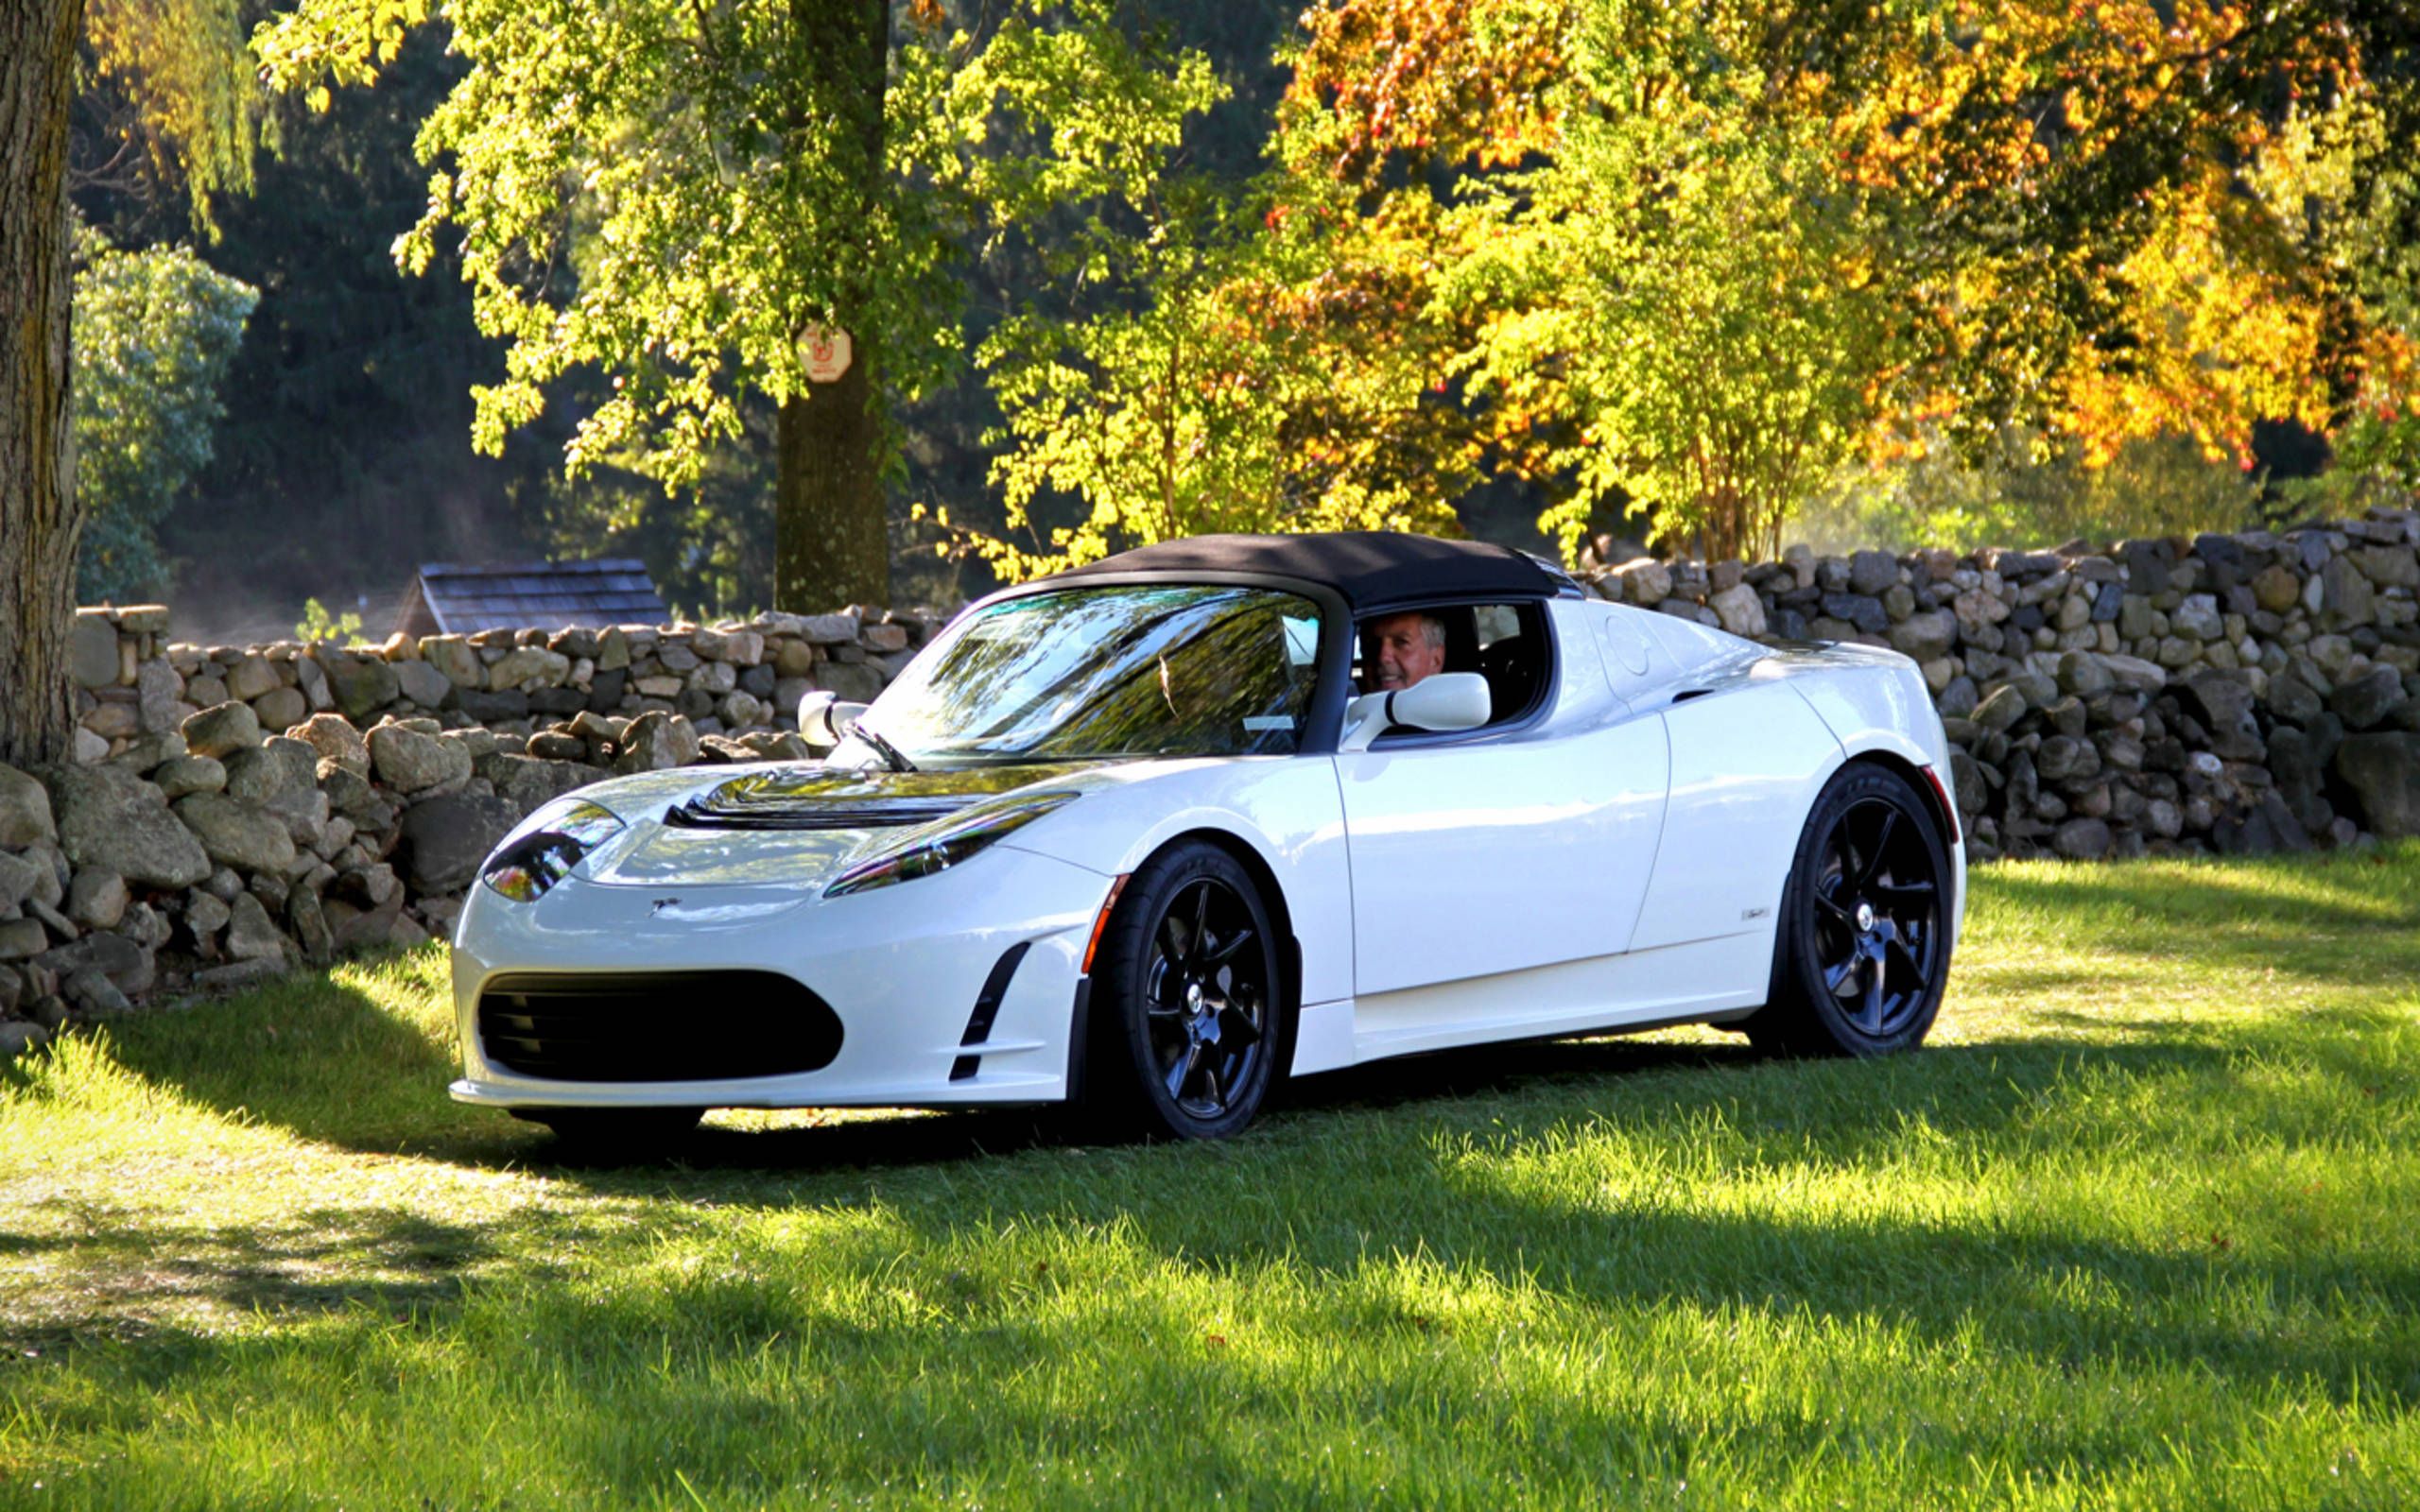 The First Tesla Roadster: A Look Back At The Early Adopter'S Electric Car